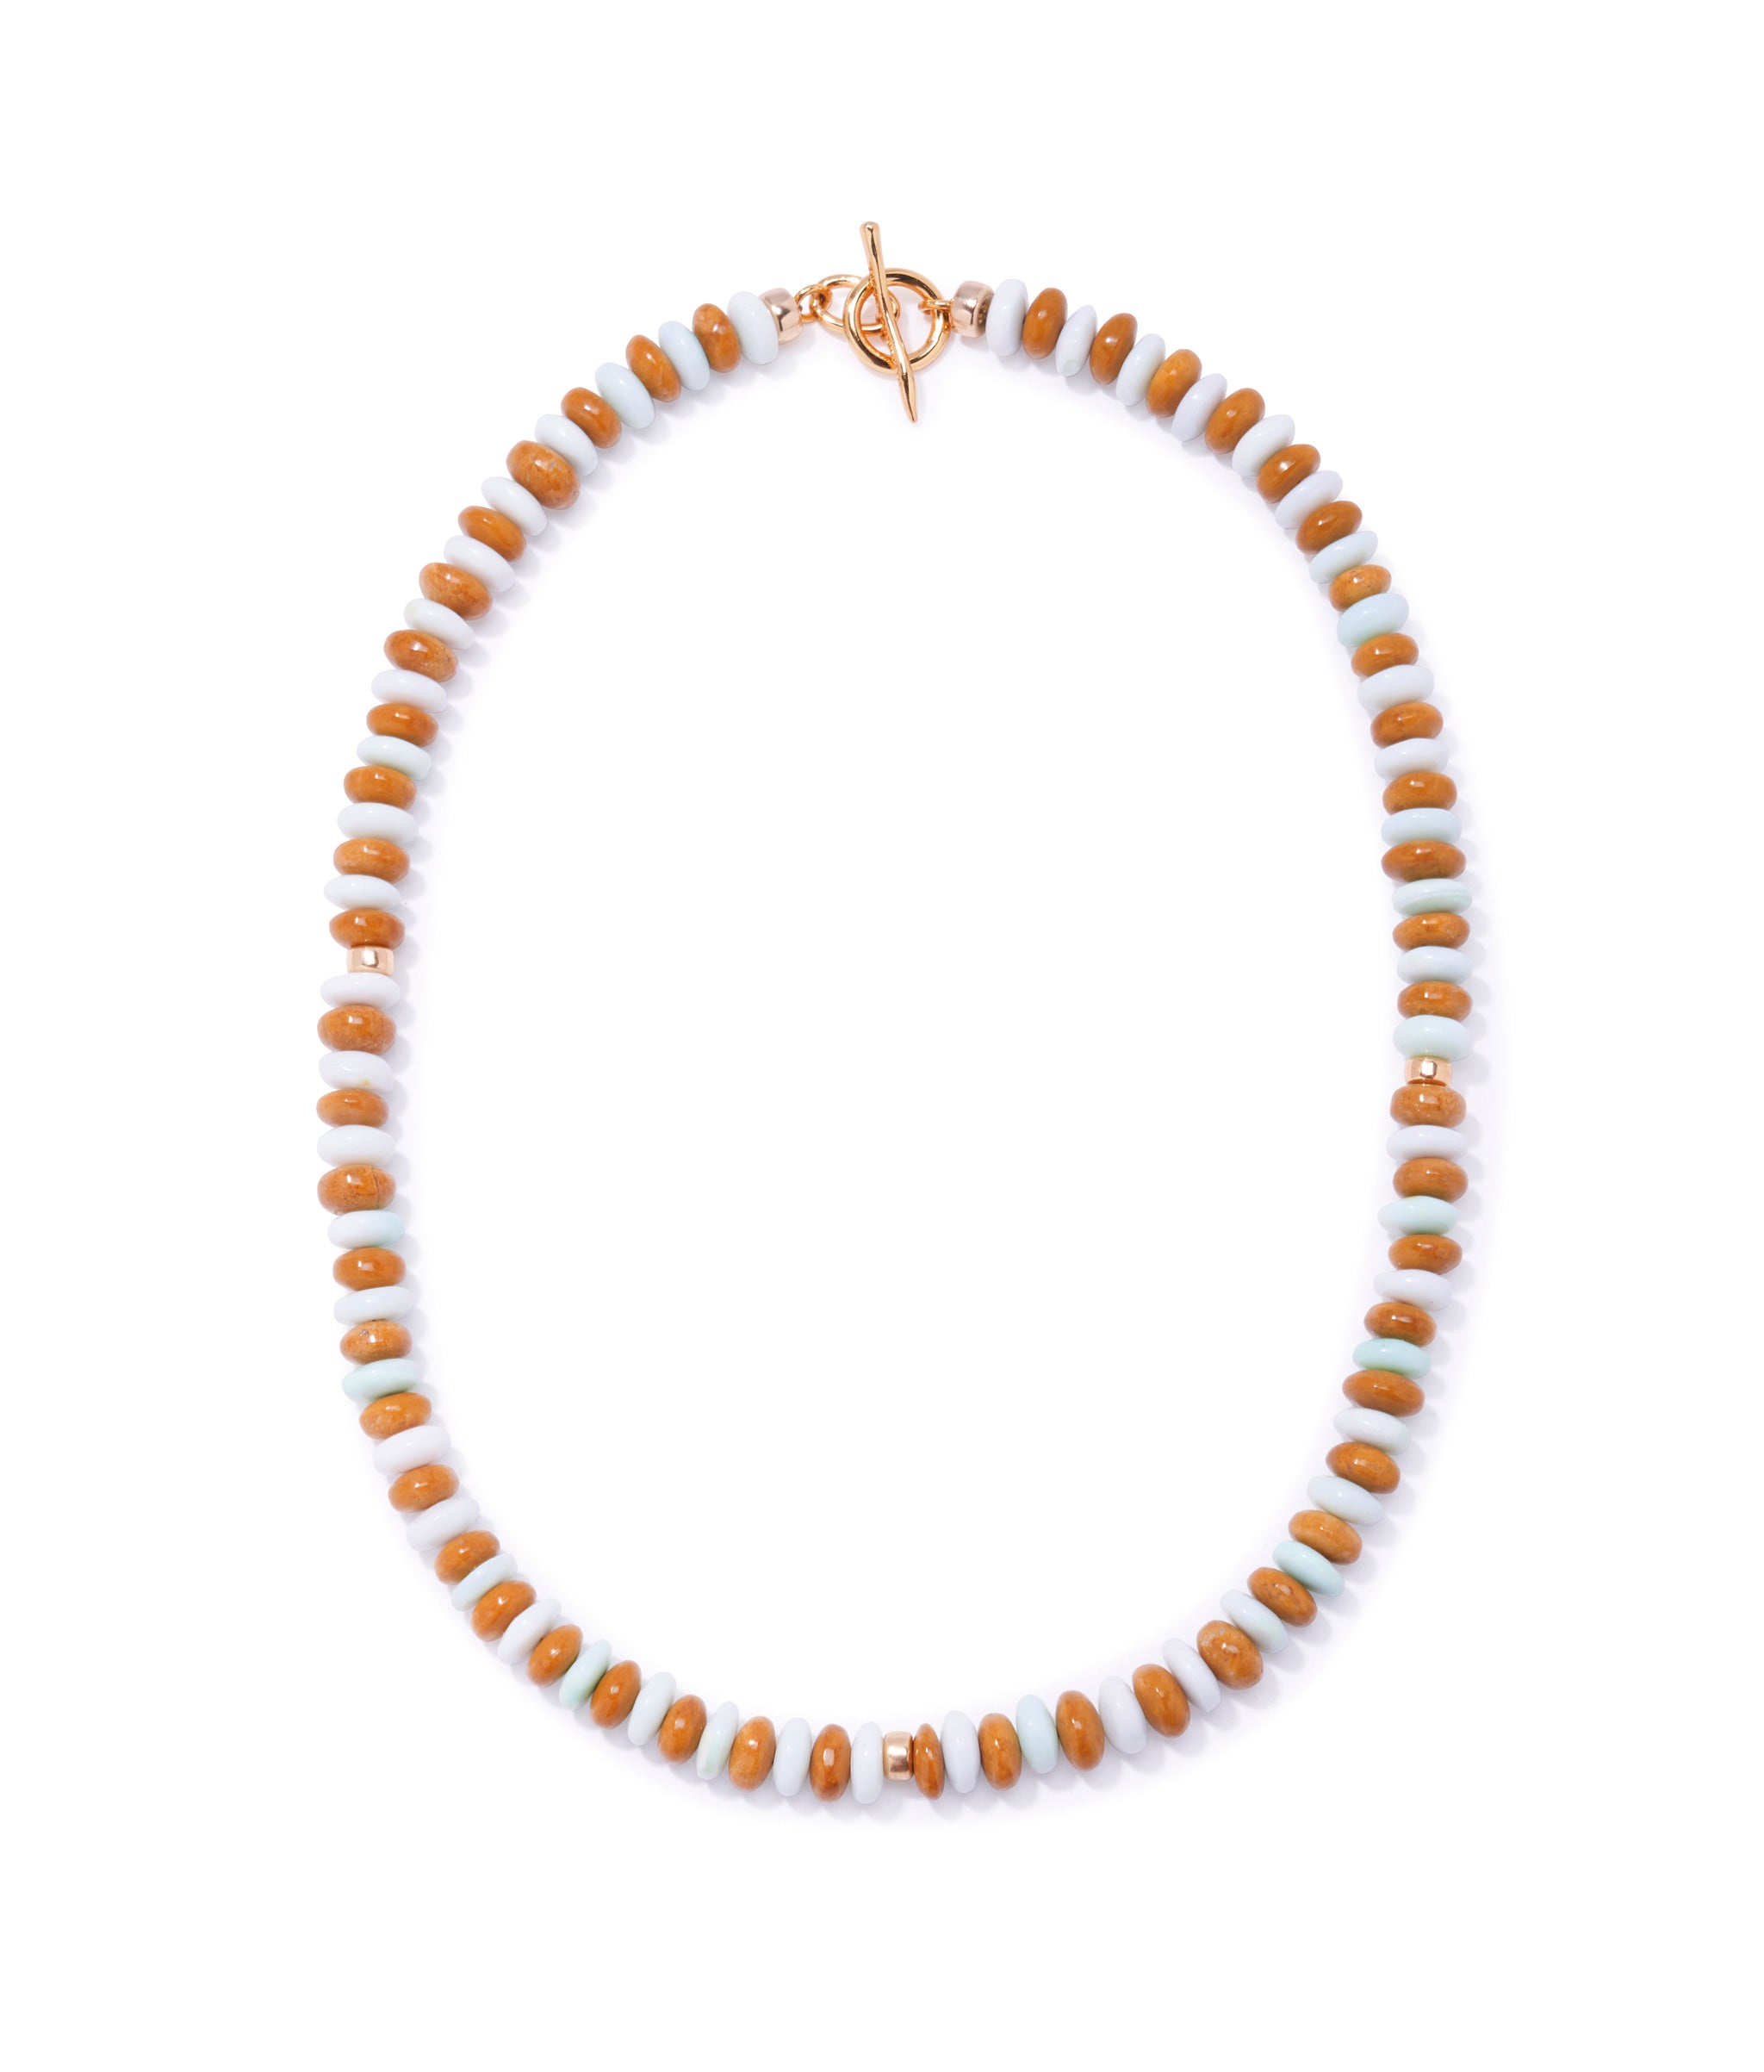 Moritz Necklace. Single strand of alternating blue opal and brown jasper beads with gold-plated brass toggle closure.